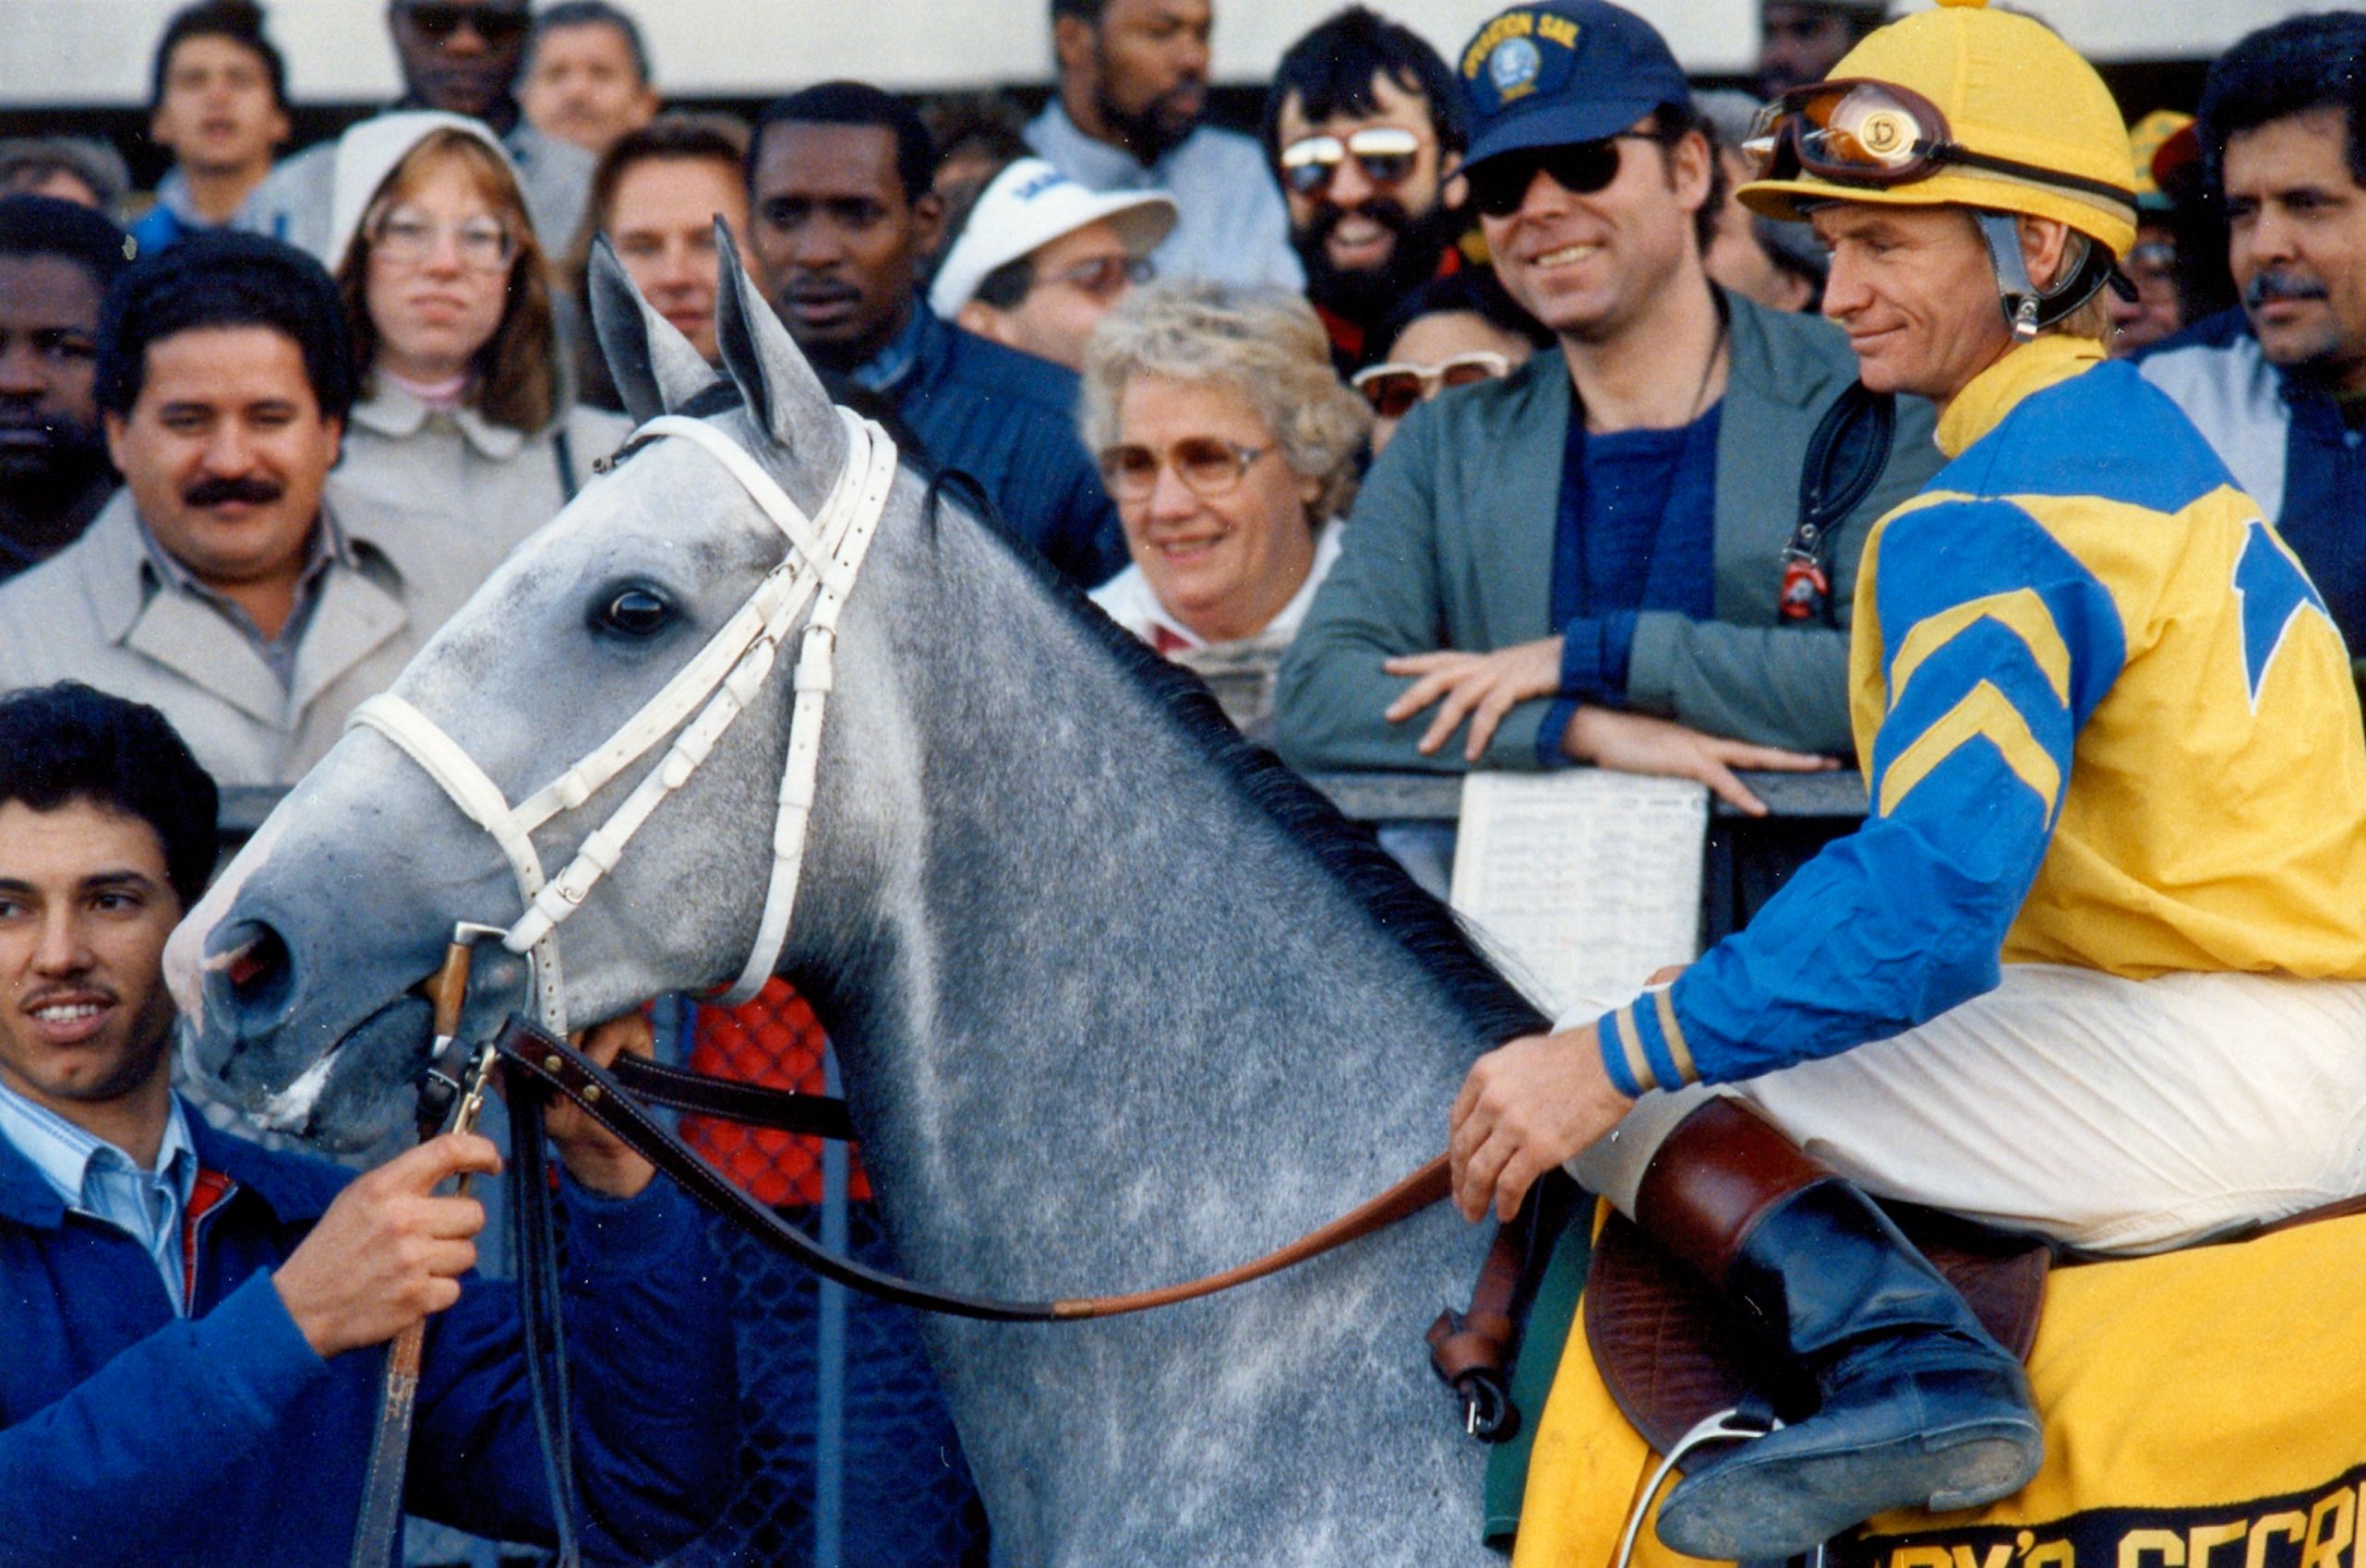 Lady's Secret (Pat Day up) in the winner's circle at Belmont Park in 1986 for Lady's Secret Day (Barbara D. Livingston/Museum Collection)